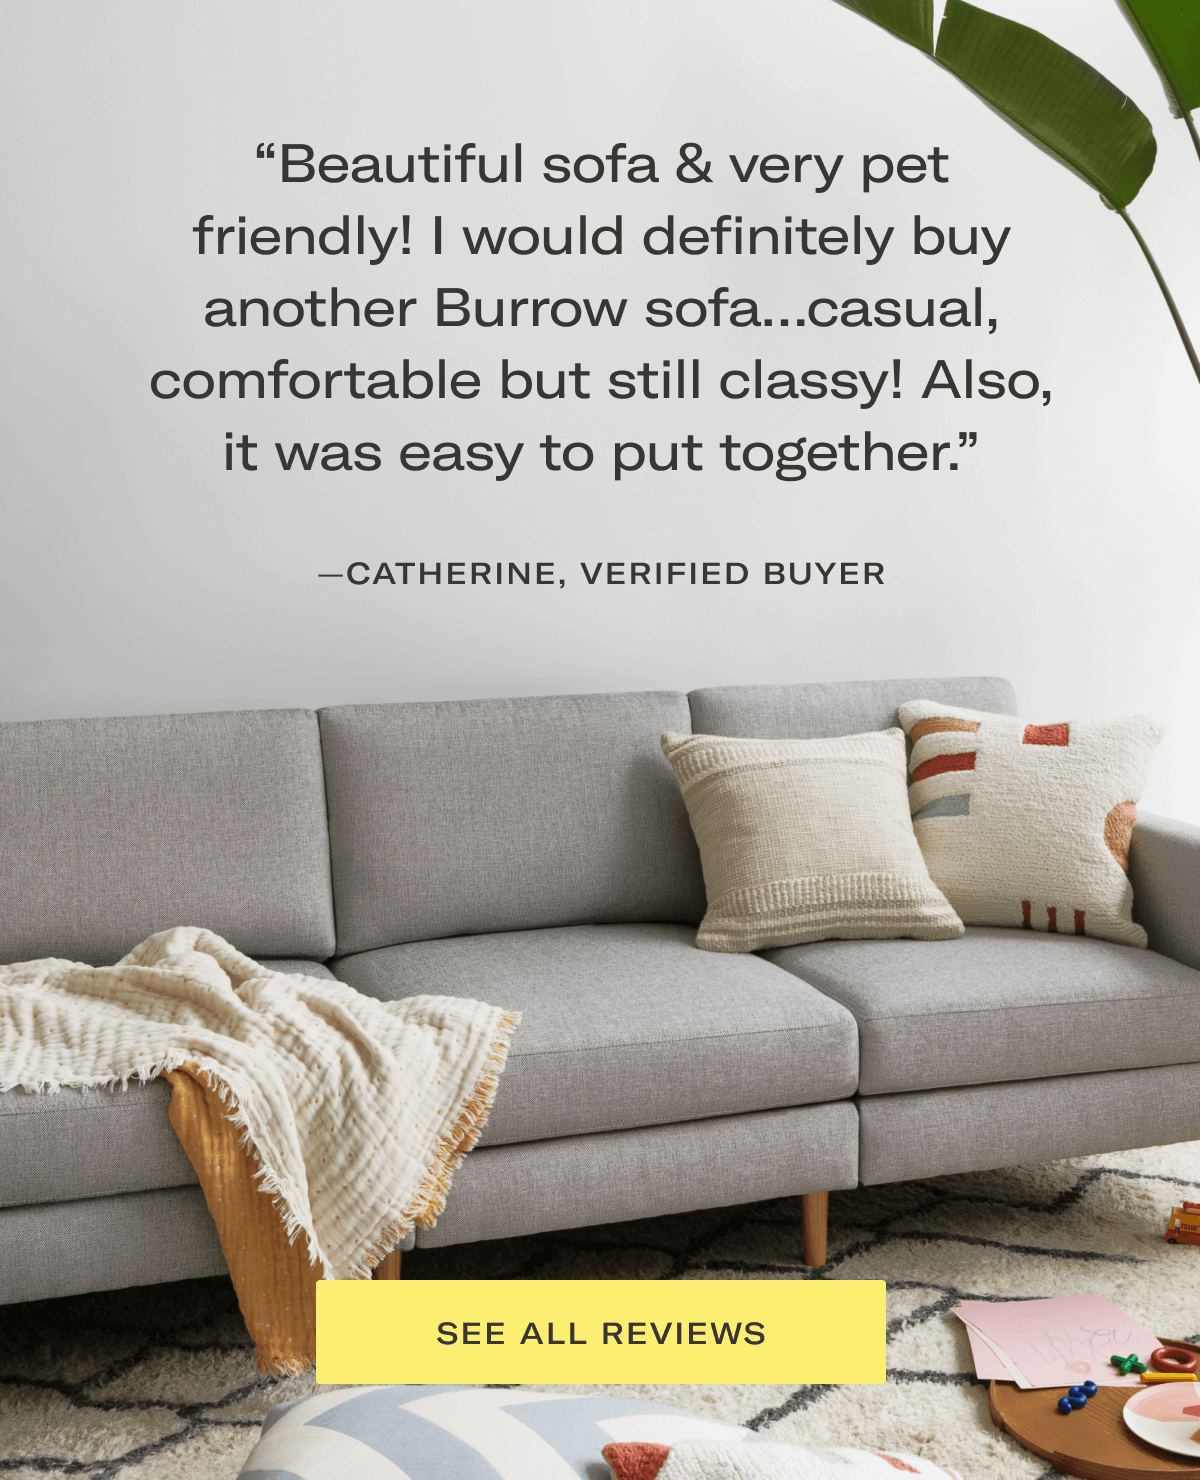 Review by Catherine, Verified buyer